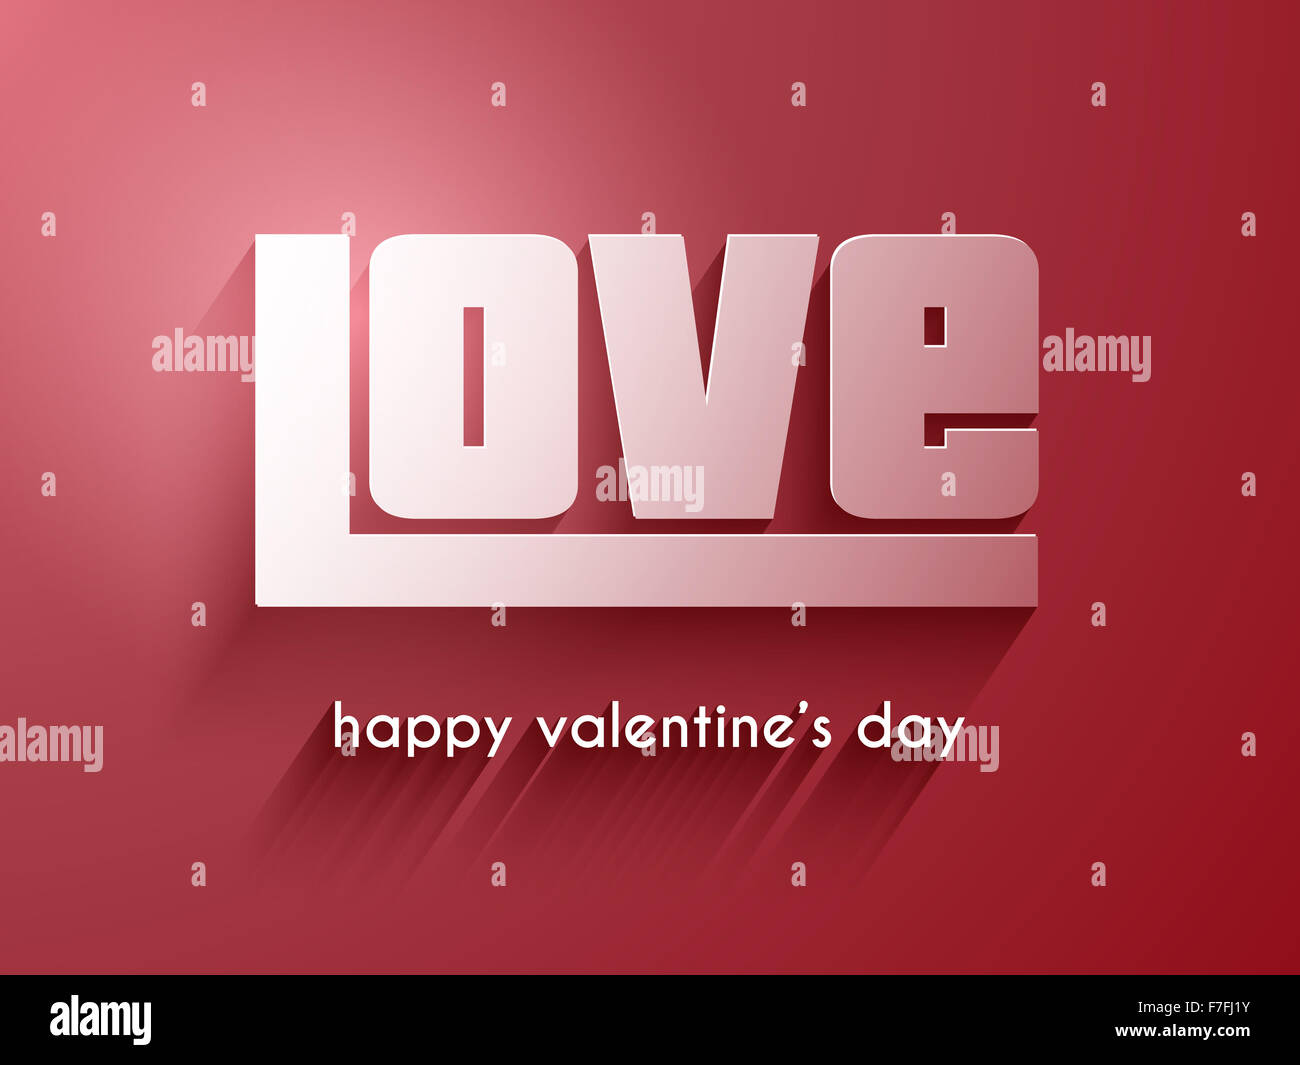 Valentine's day background with typography design Stock Photo